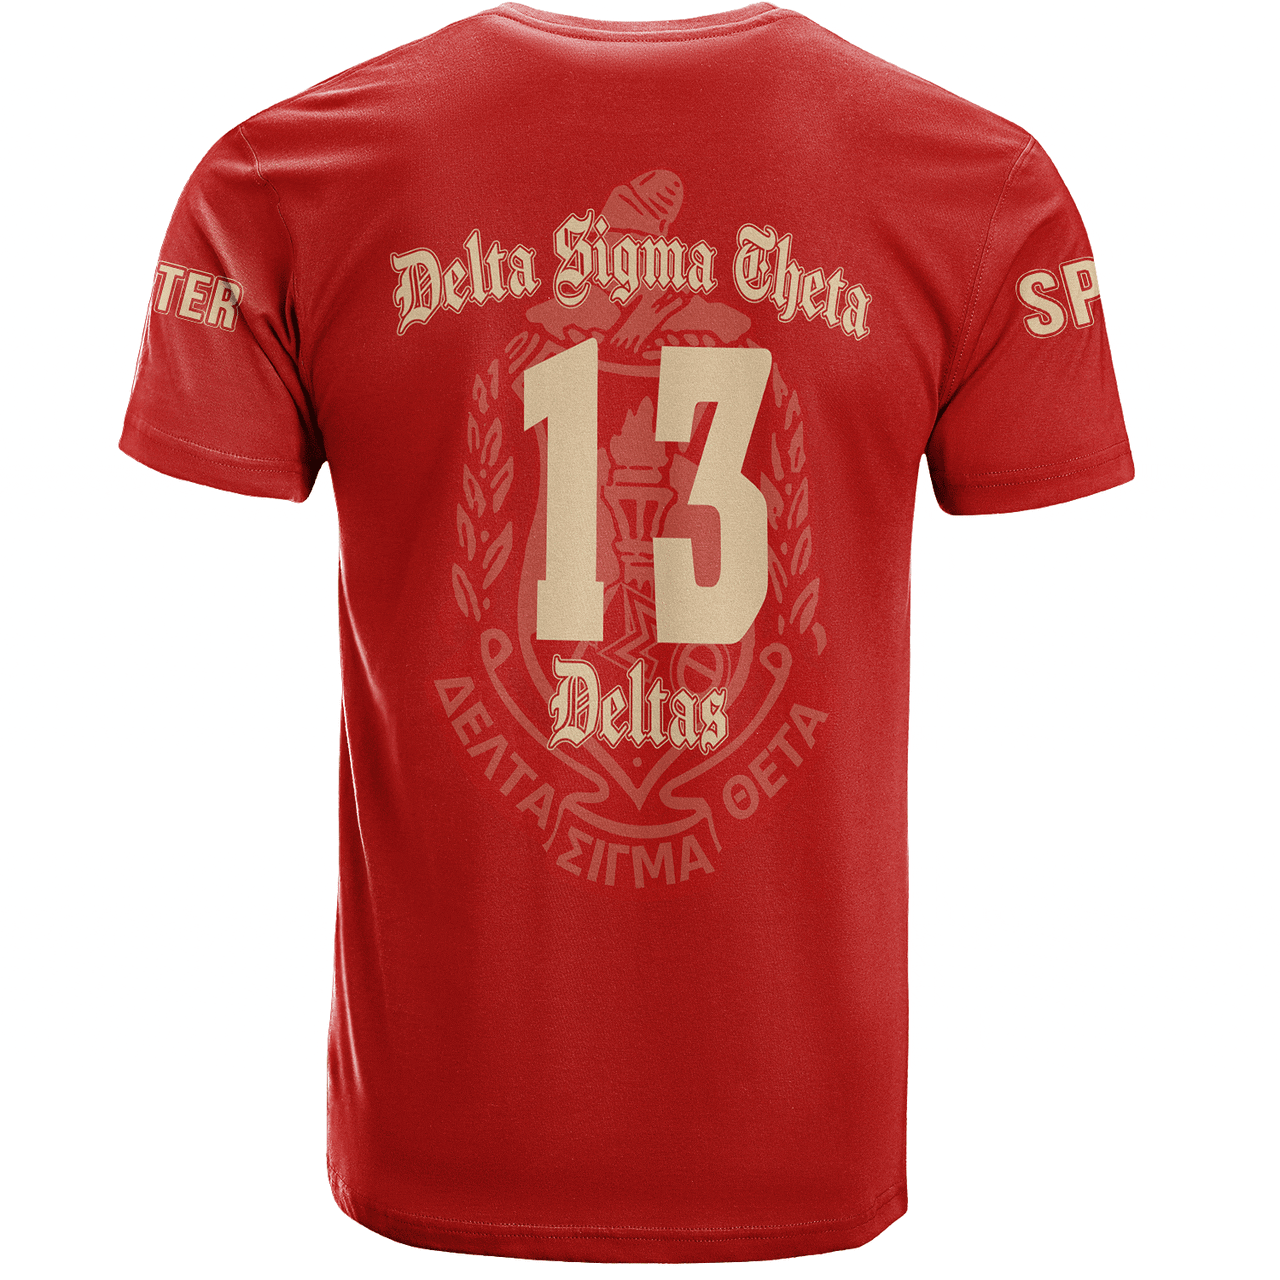 Delta Sigma Theta T-Shirt Custom Chapter And Spring Style